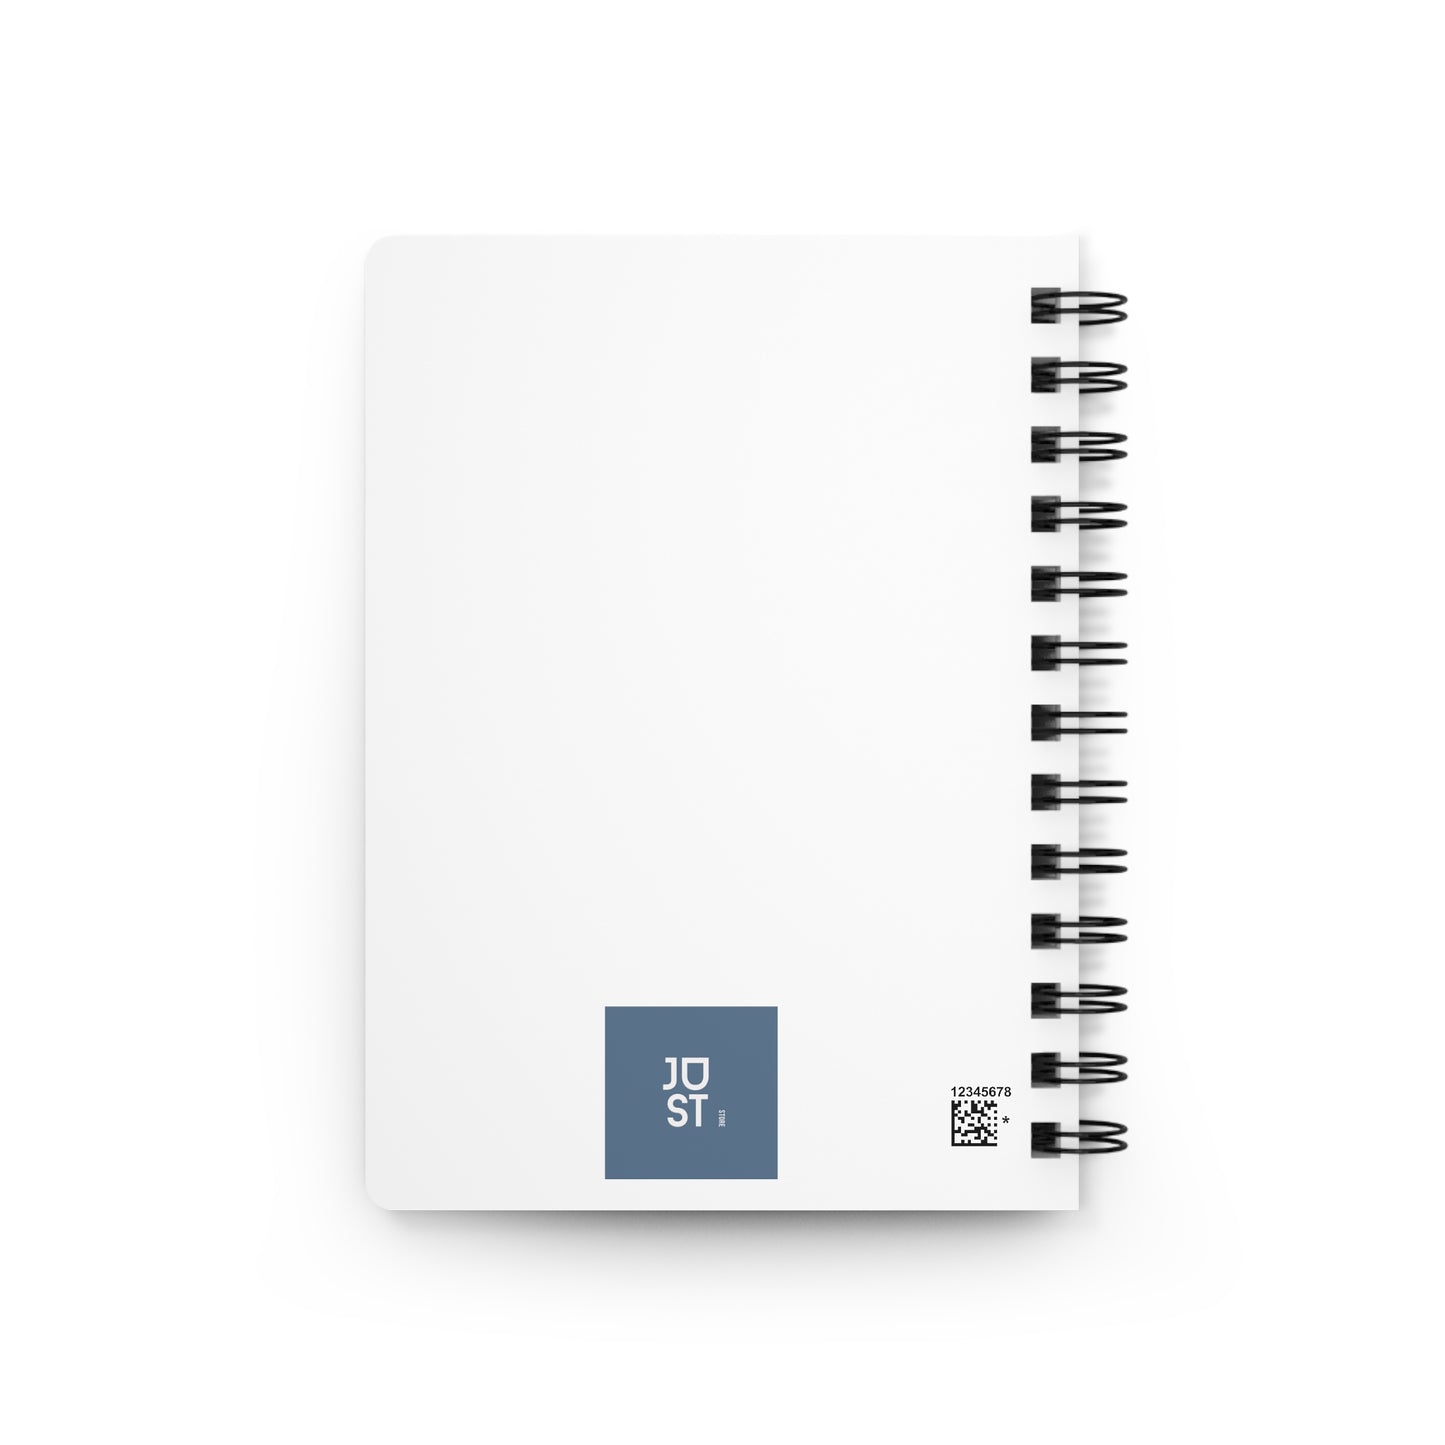 Back cover of White Spiral Bound Notebook with the logo of Just Store 